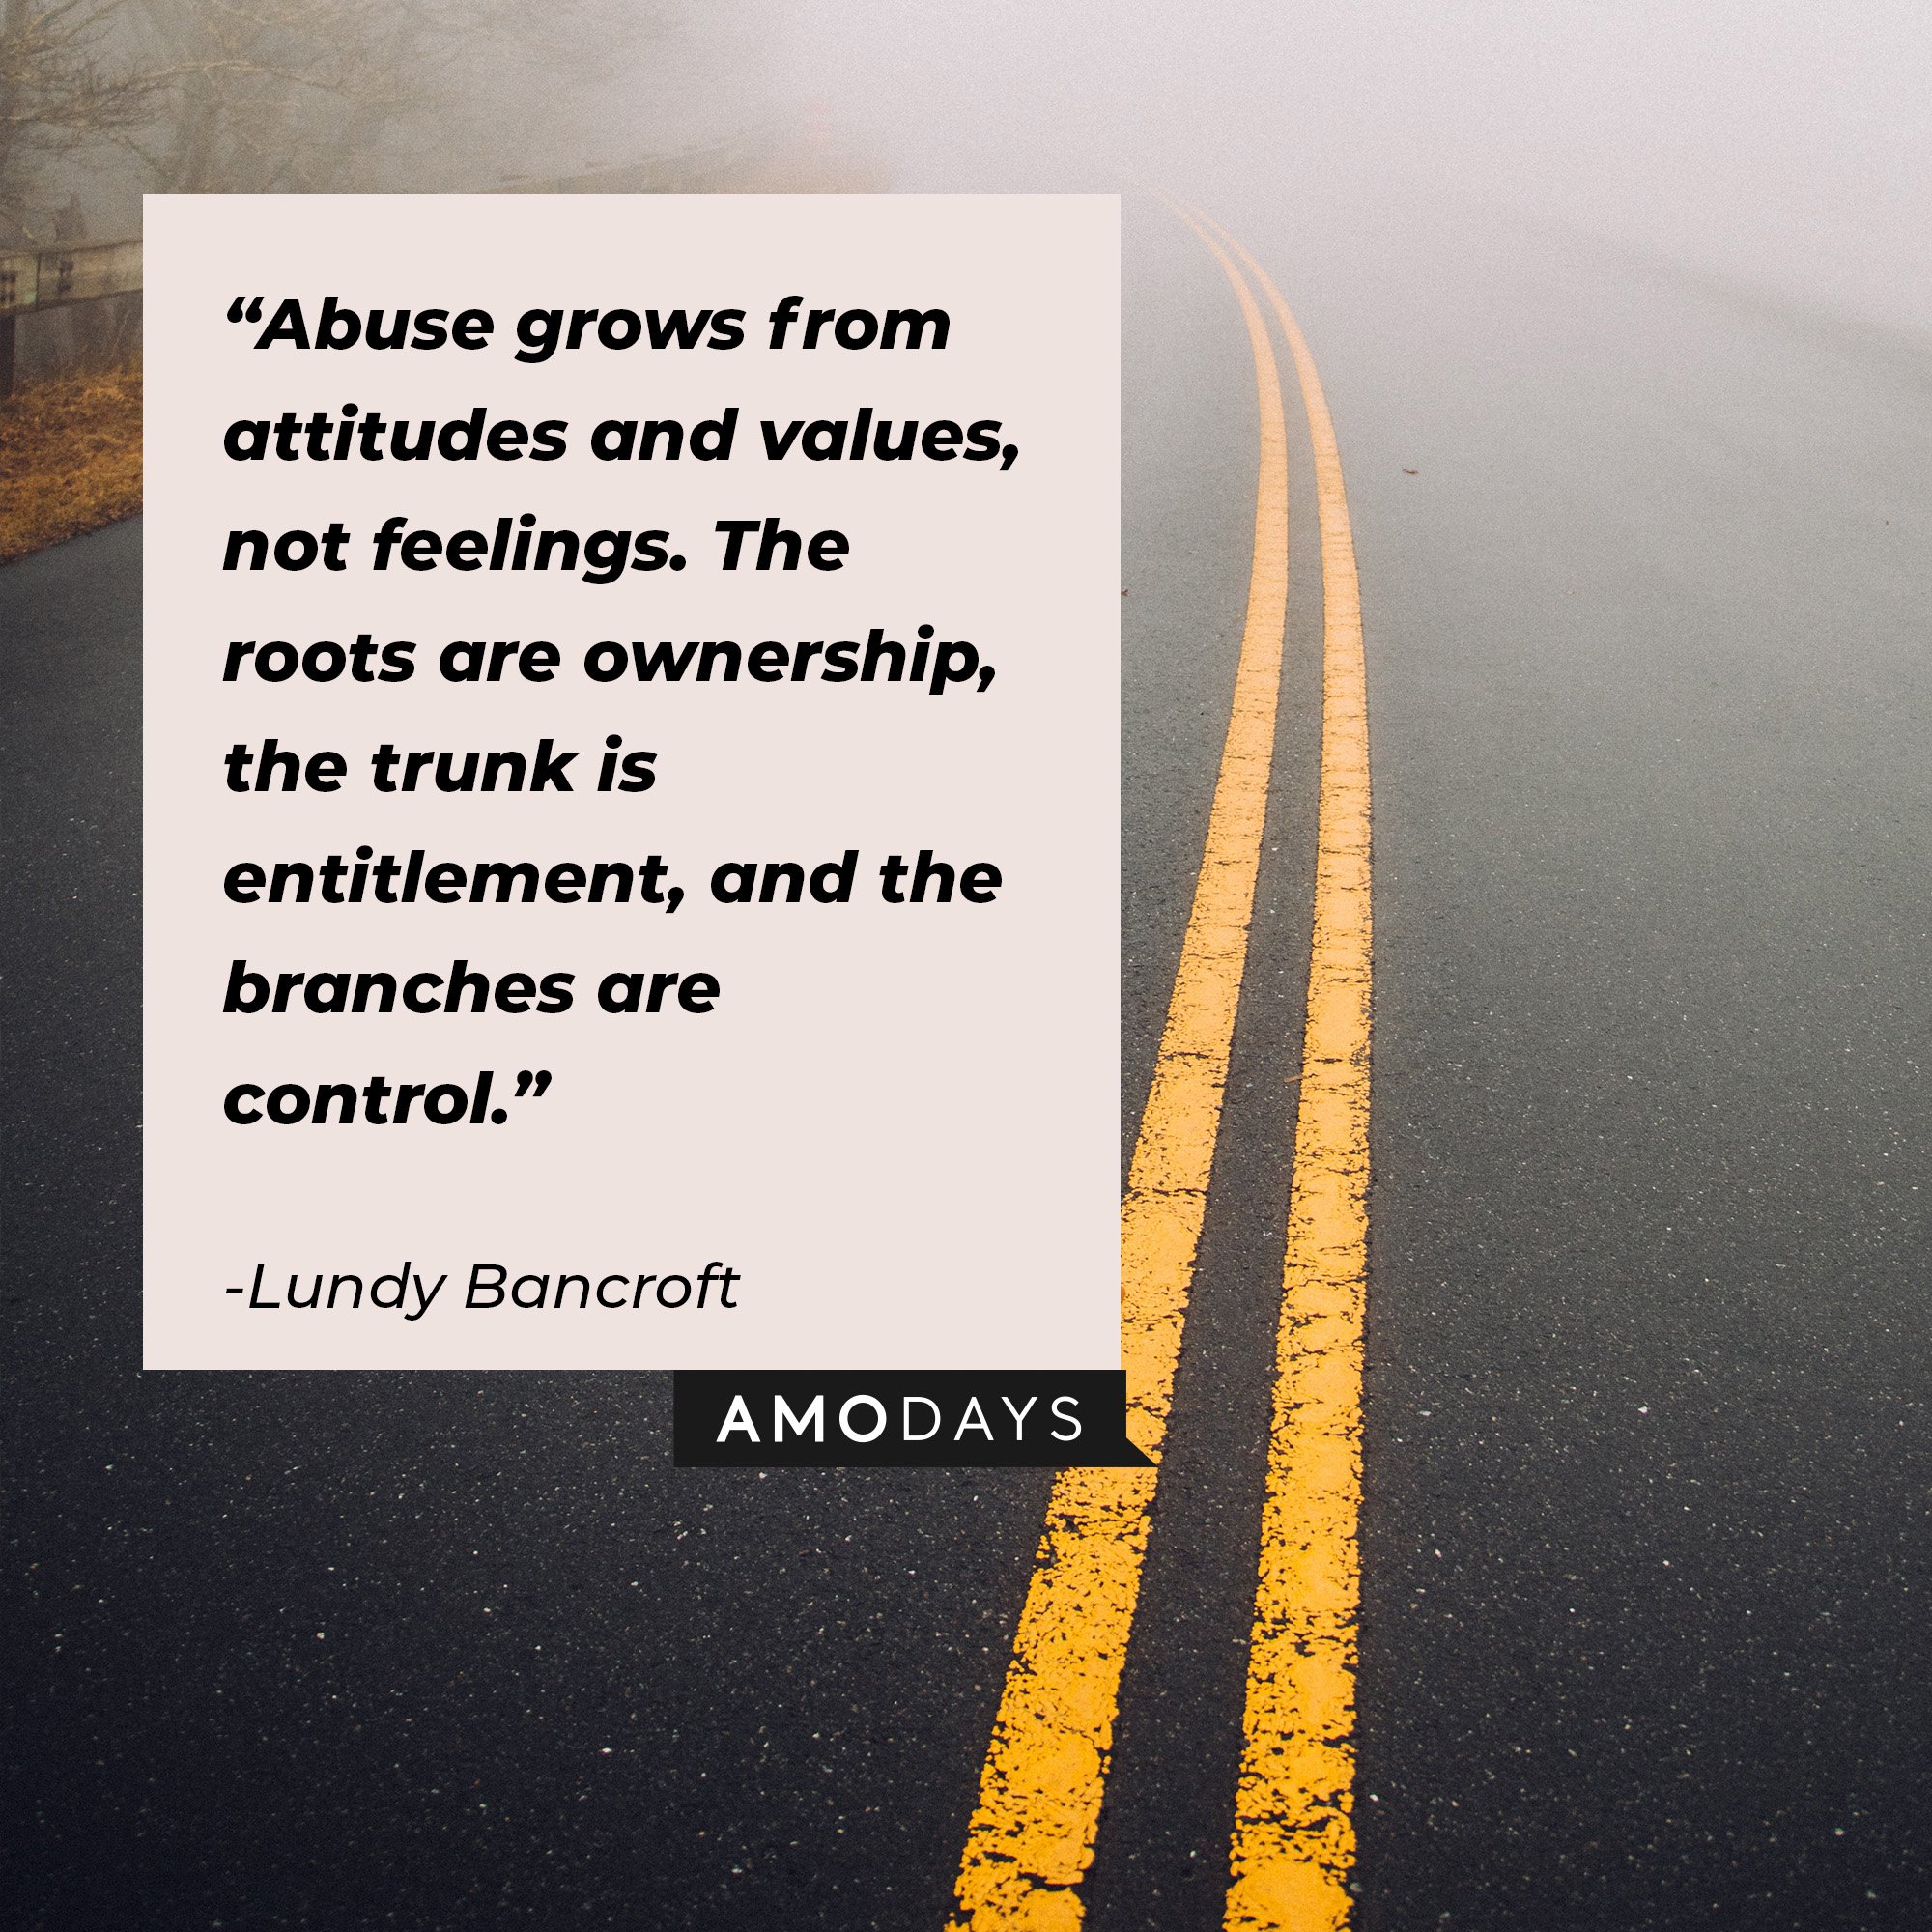 Lundy Bancroft’s quote: "Abuse grows from attitudes and values, not feelings. The roots are ownership, the trunk is entitlement, and the branches are control. " |  Image: AmoDays  